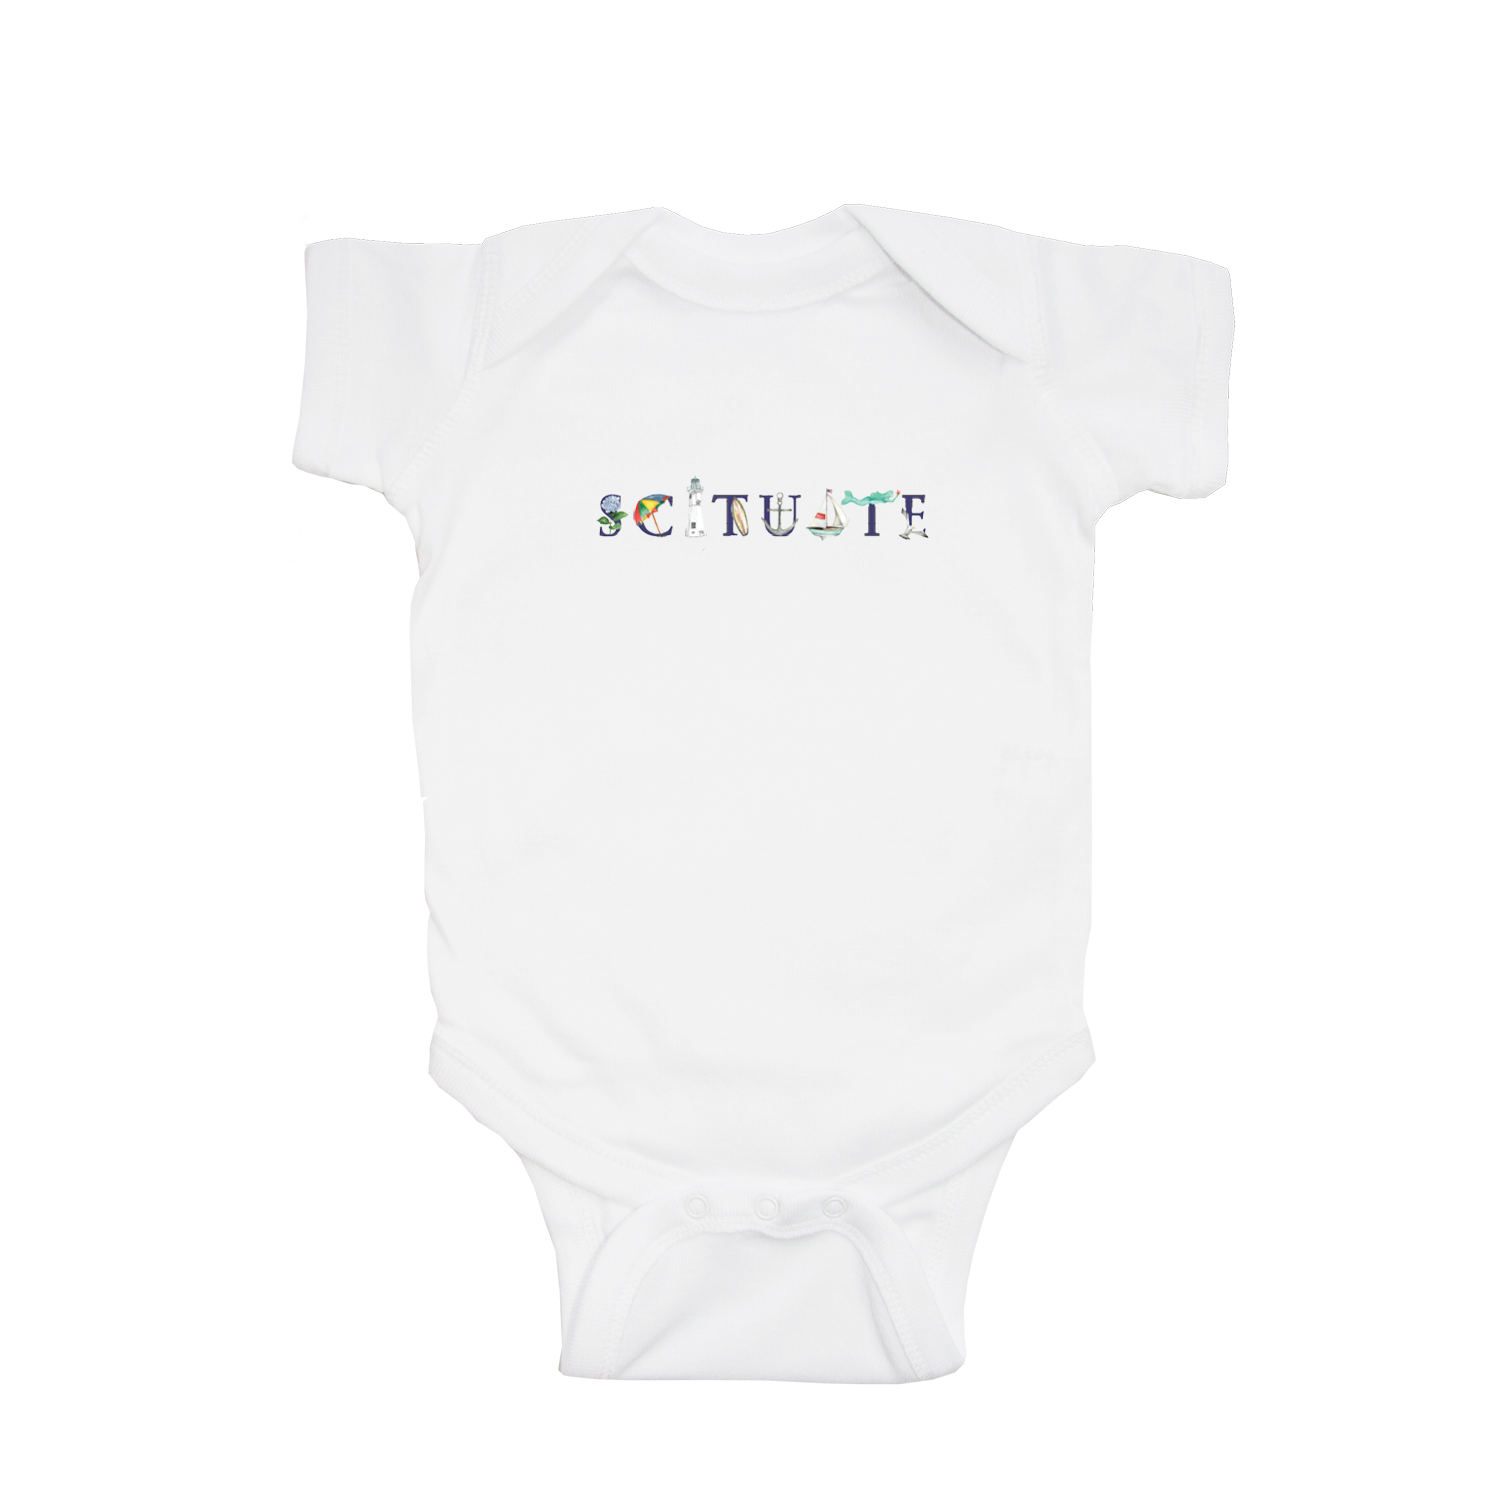 Scituate baby snap up short sleeve